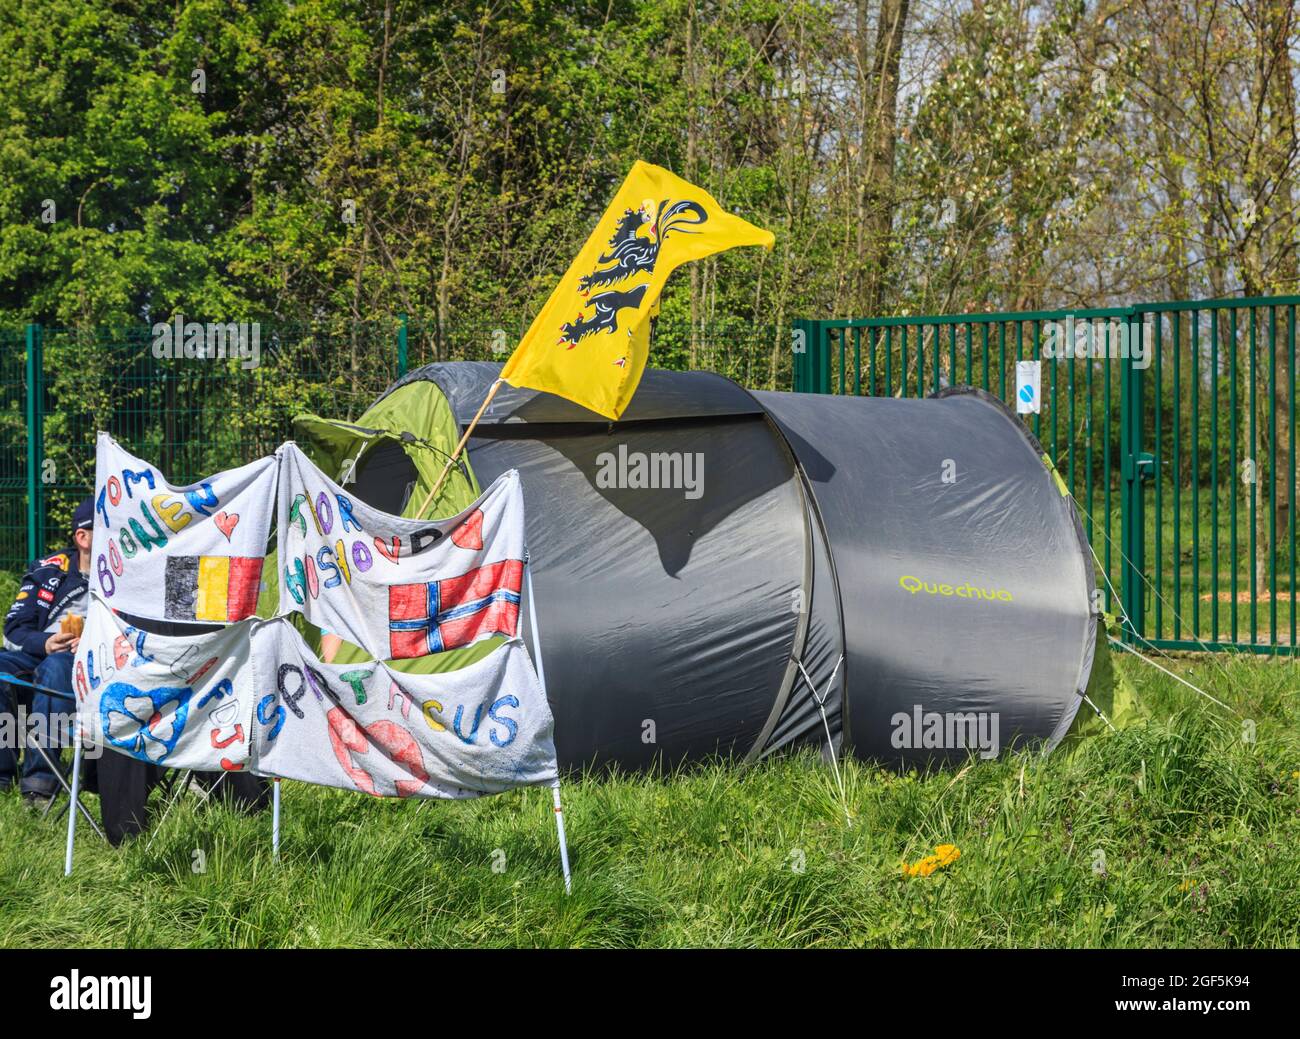 Camphin-en-Pévèle, France - April 13, 2014: Image of a tent of fans located  on the side of the road during Paris-Roubaix 2014 Stock Photo - Alamy